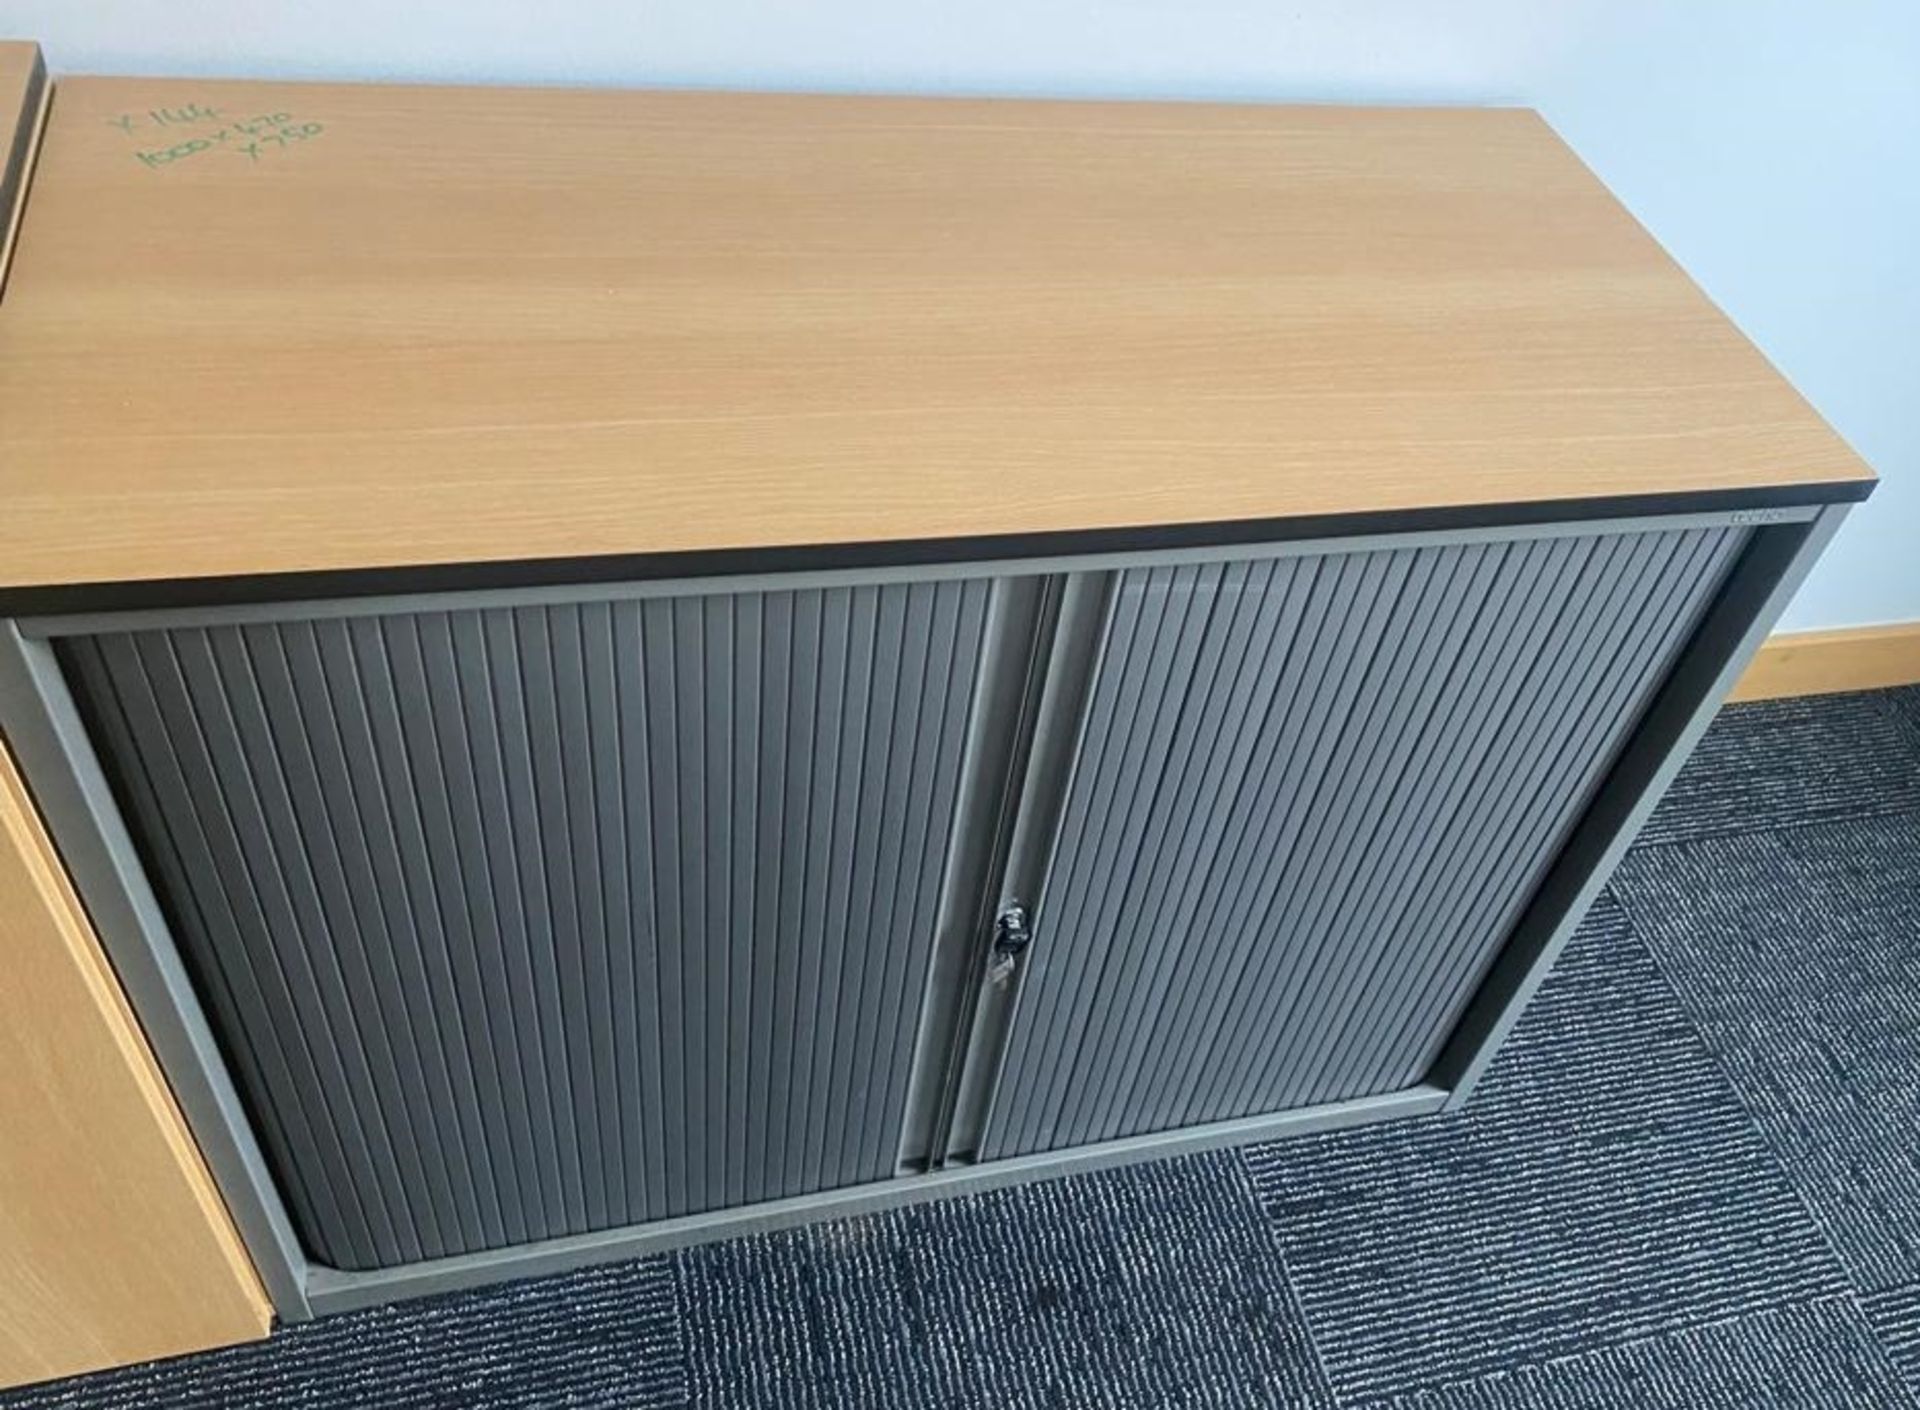 1 x Office Storage Cabinet With Beech Wood Top and Grey Sliding Tambour Doors - Size: H75 x W100